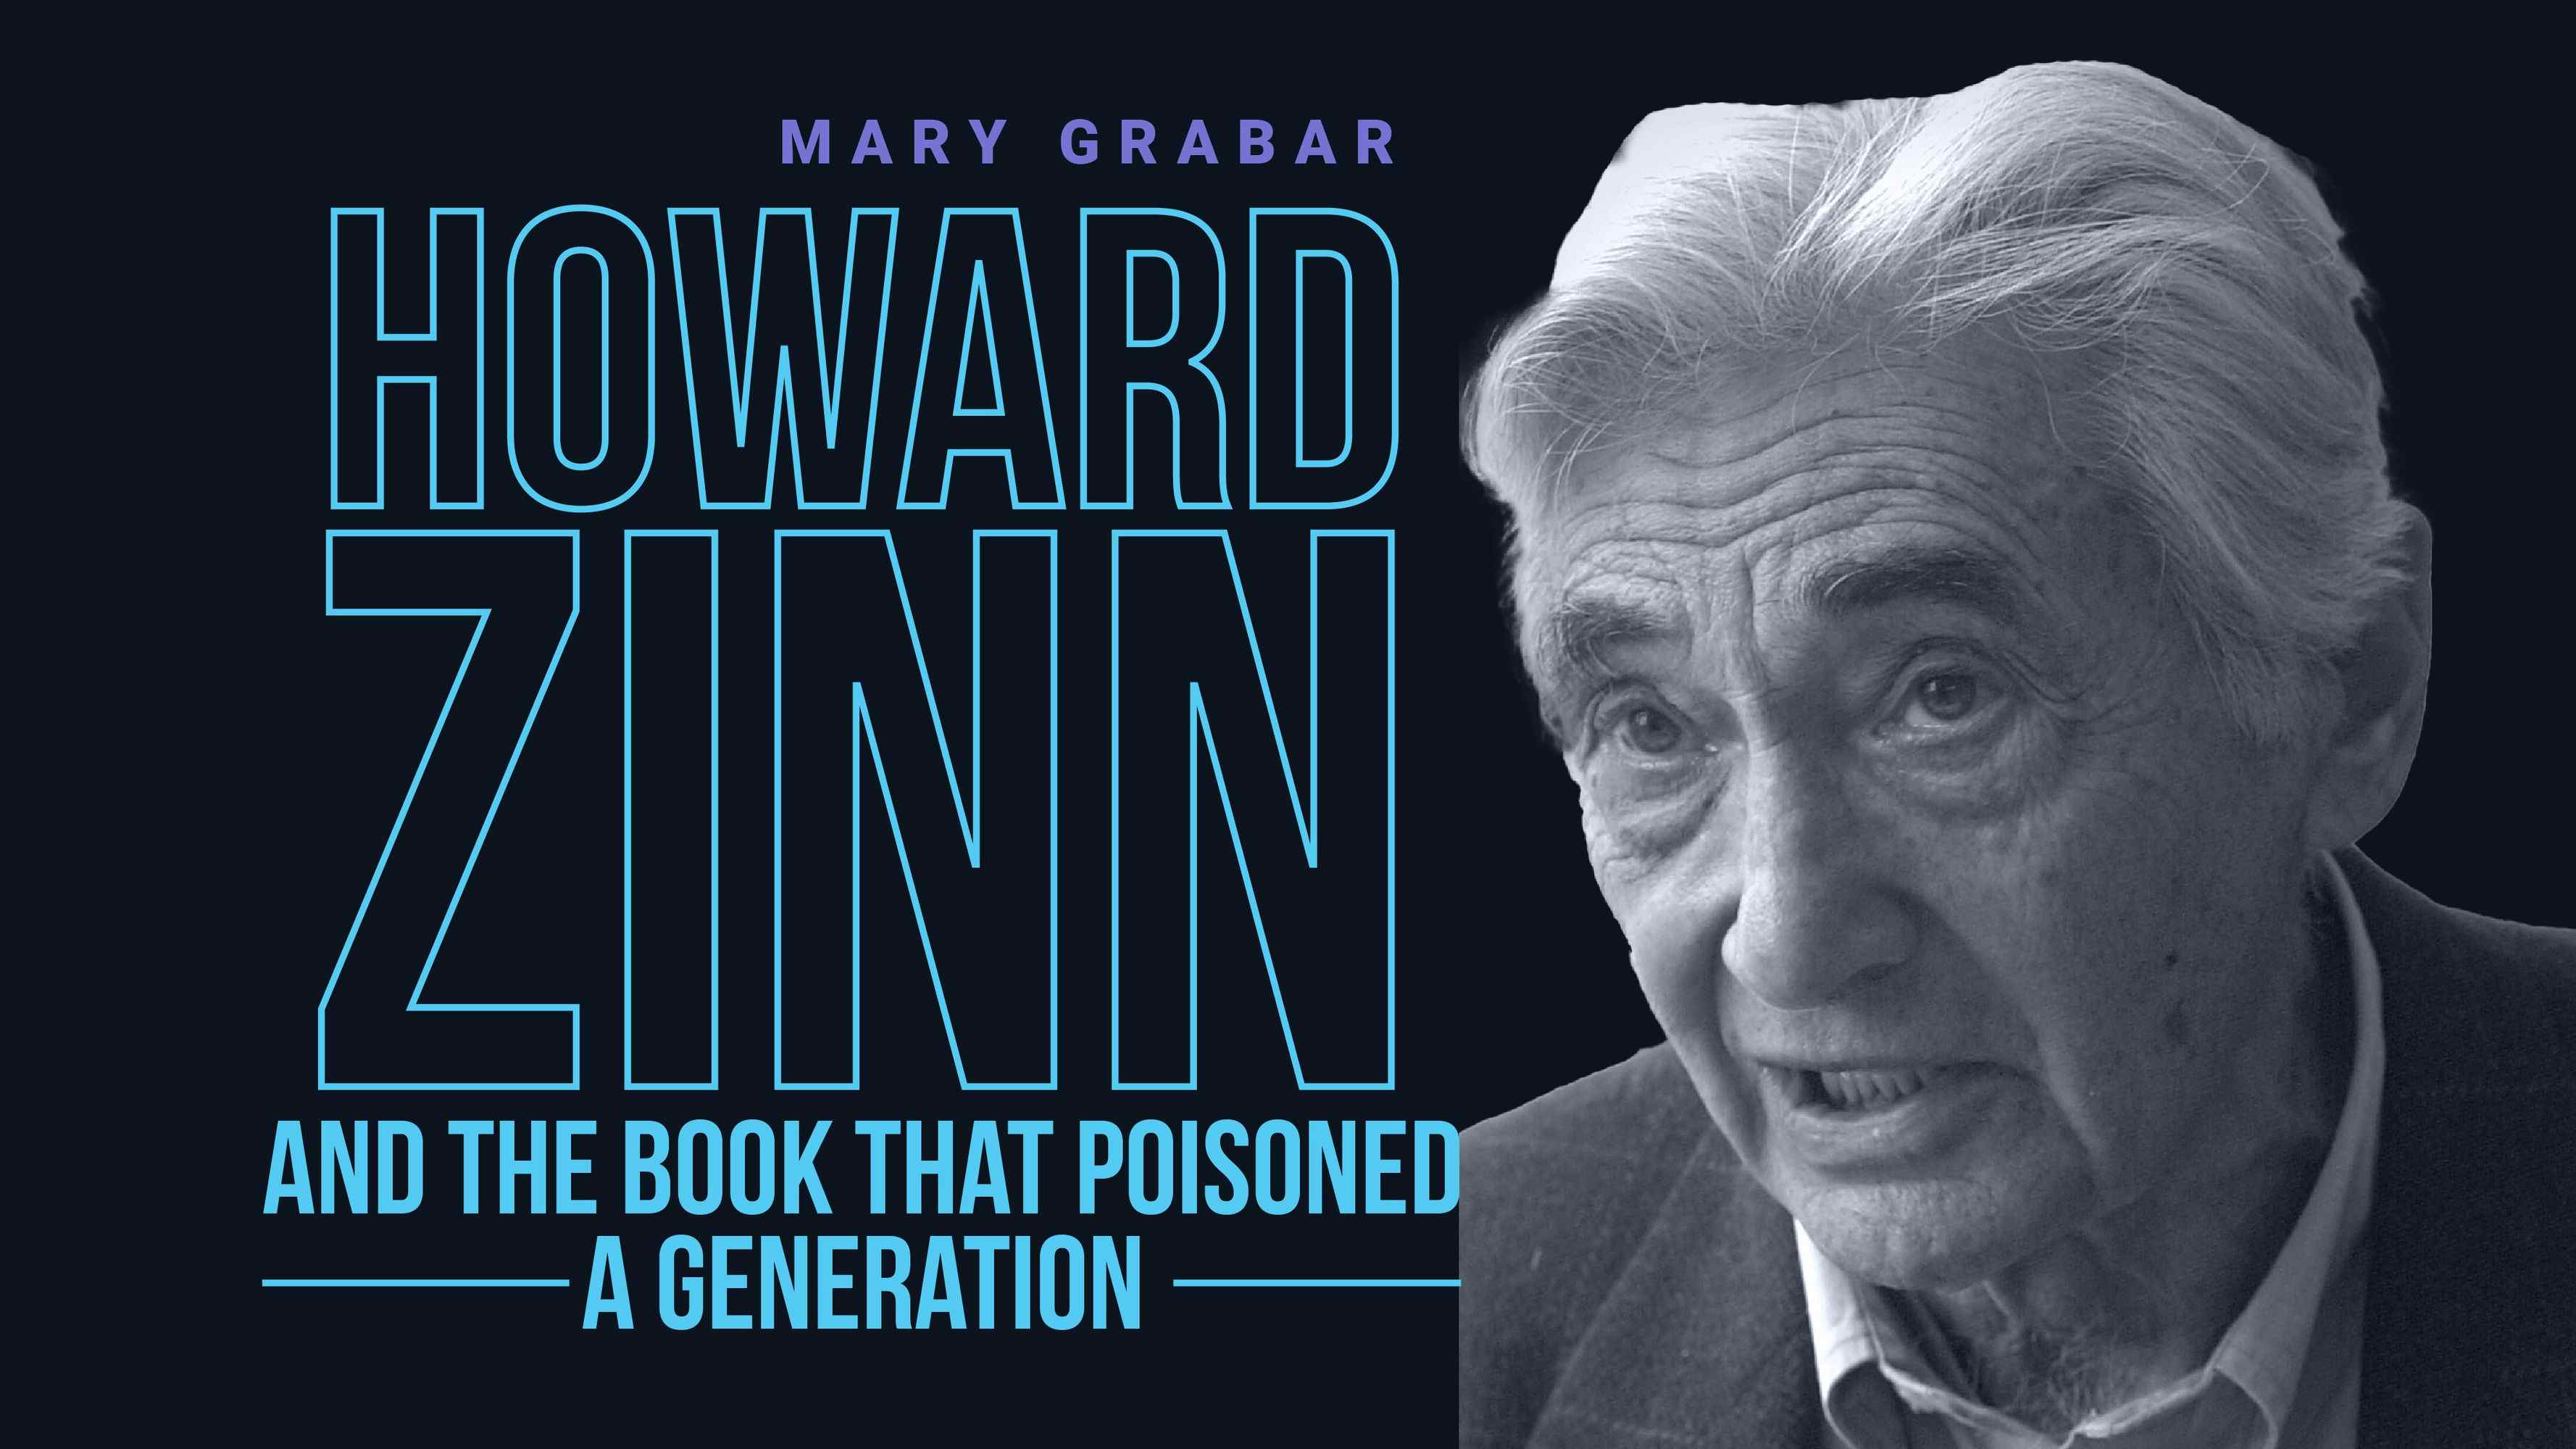 Howard Zinn and the Book That Poisoned a Generation